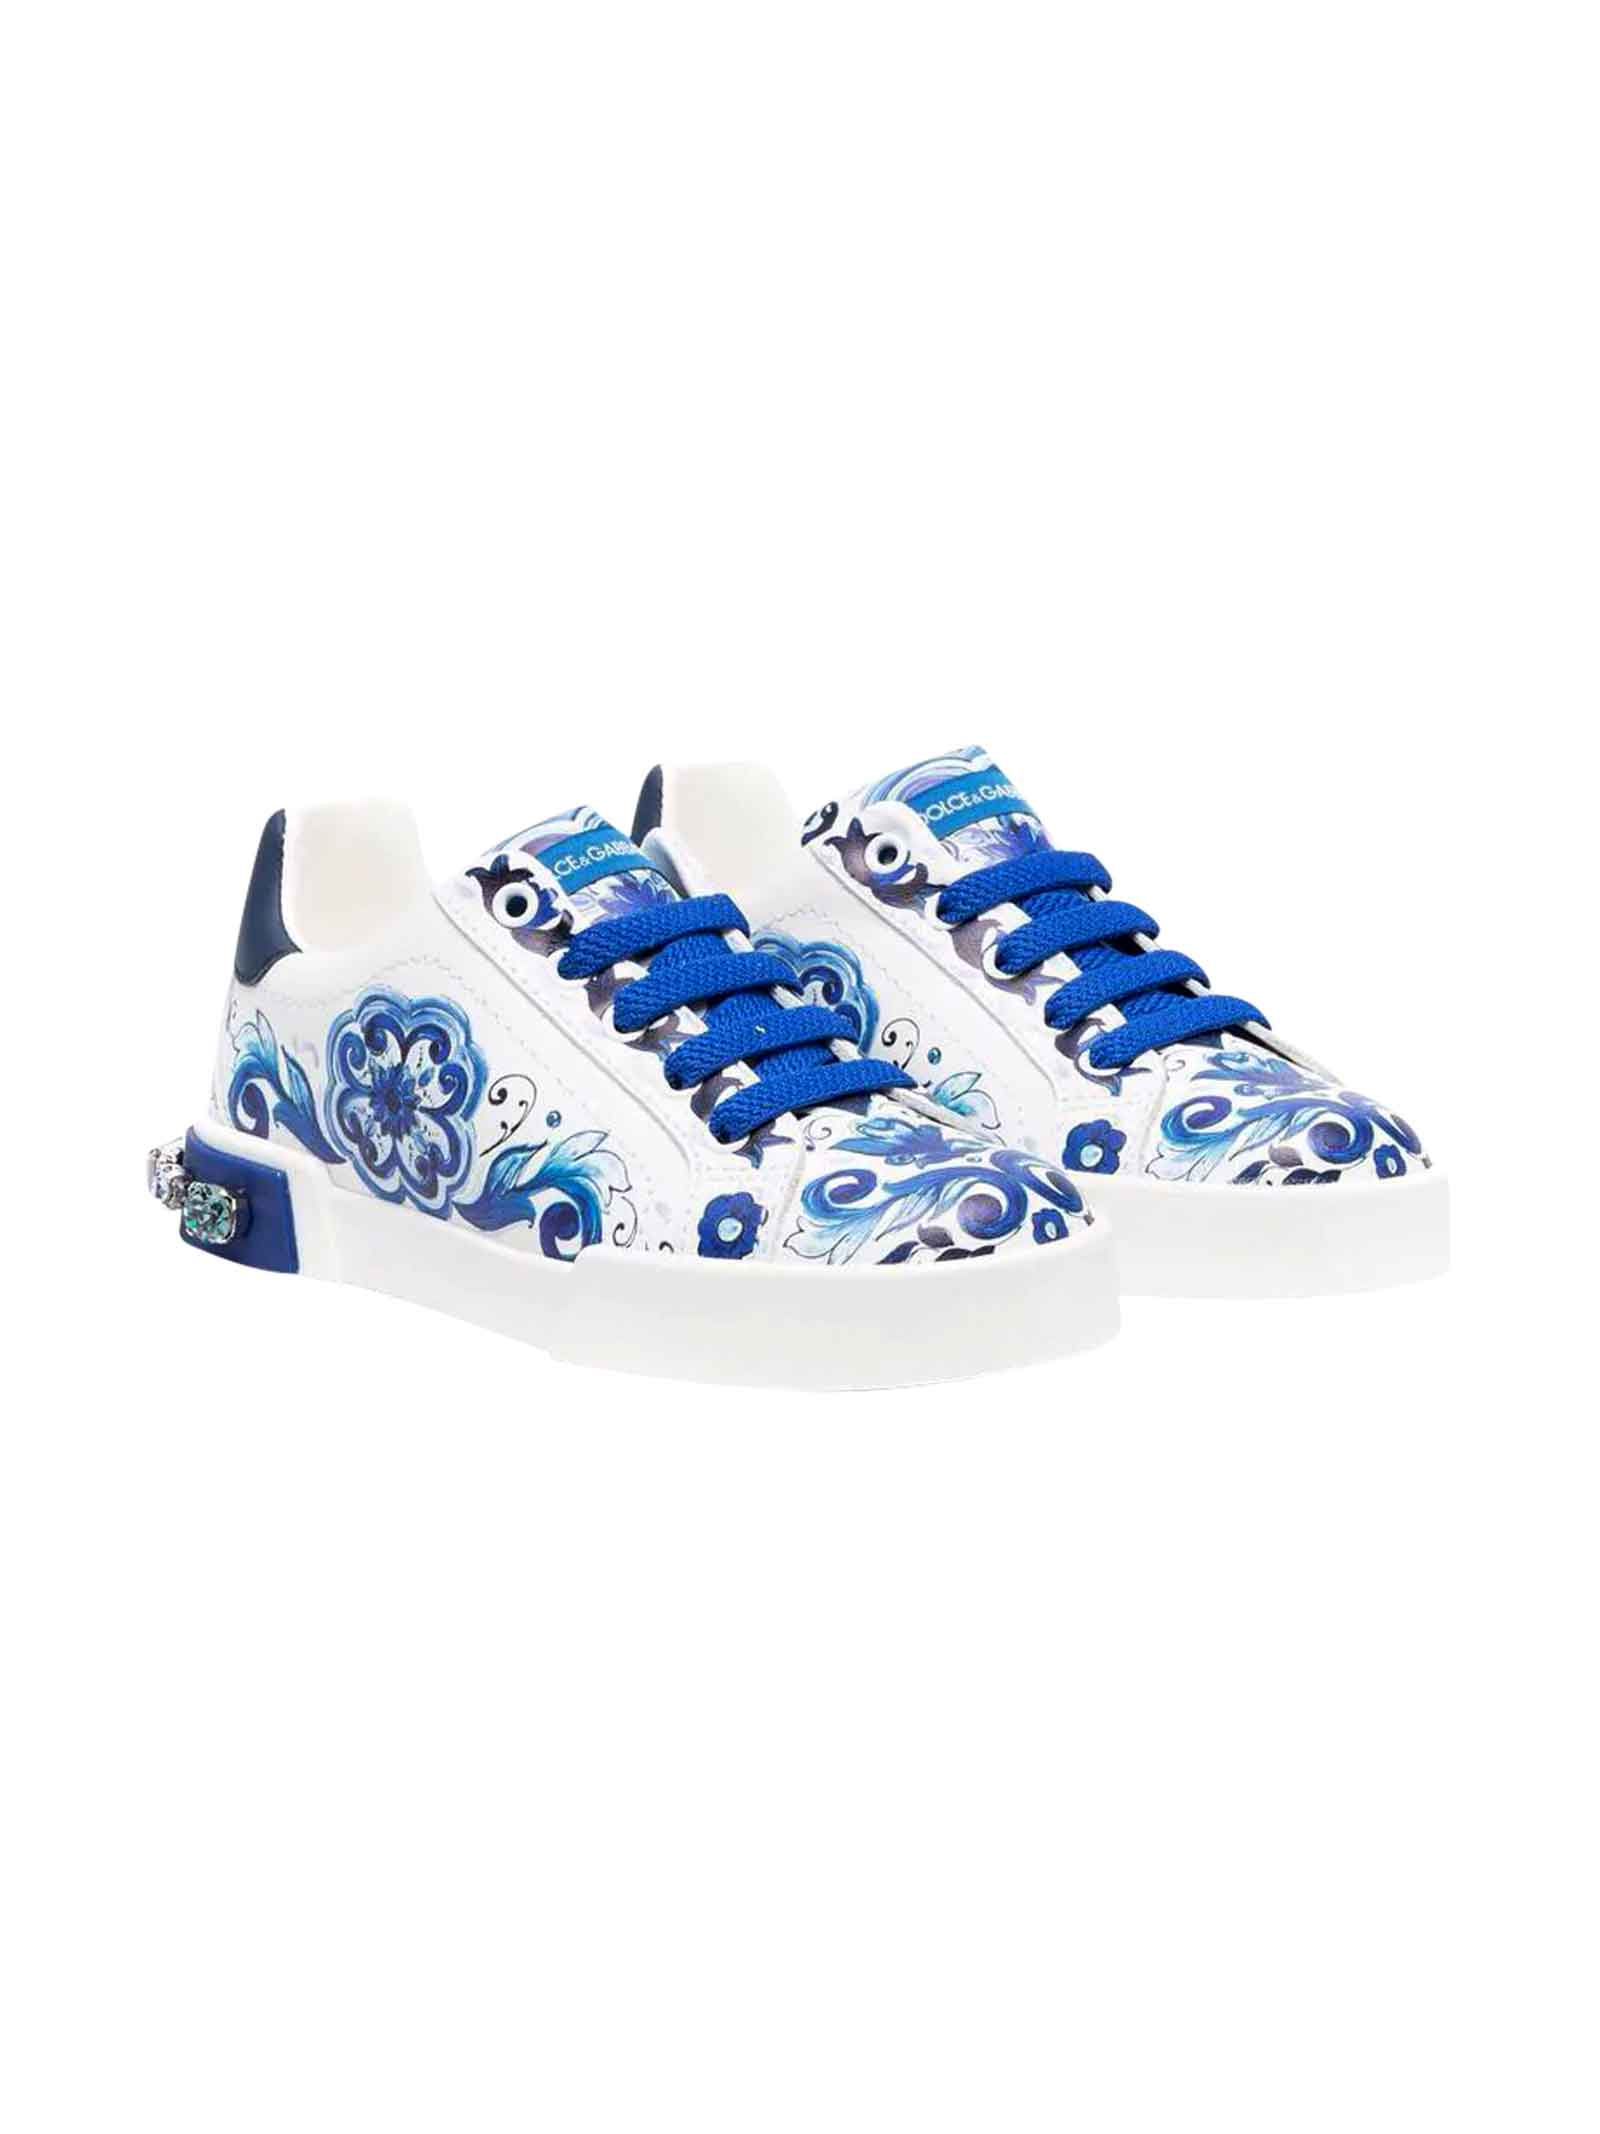 Dolce & Gabbana Blue And White Sneakers Unisex,